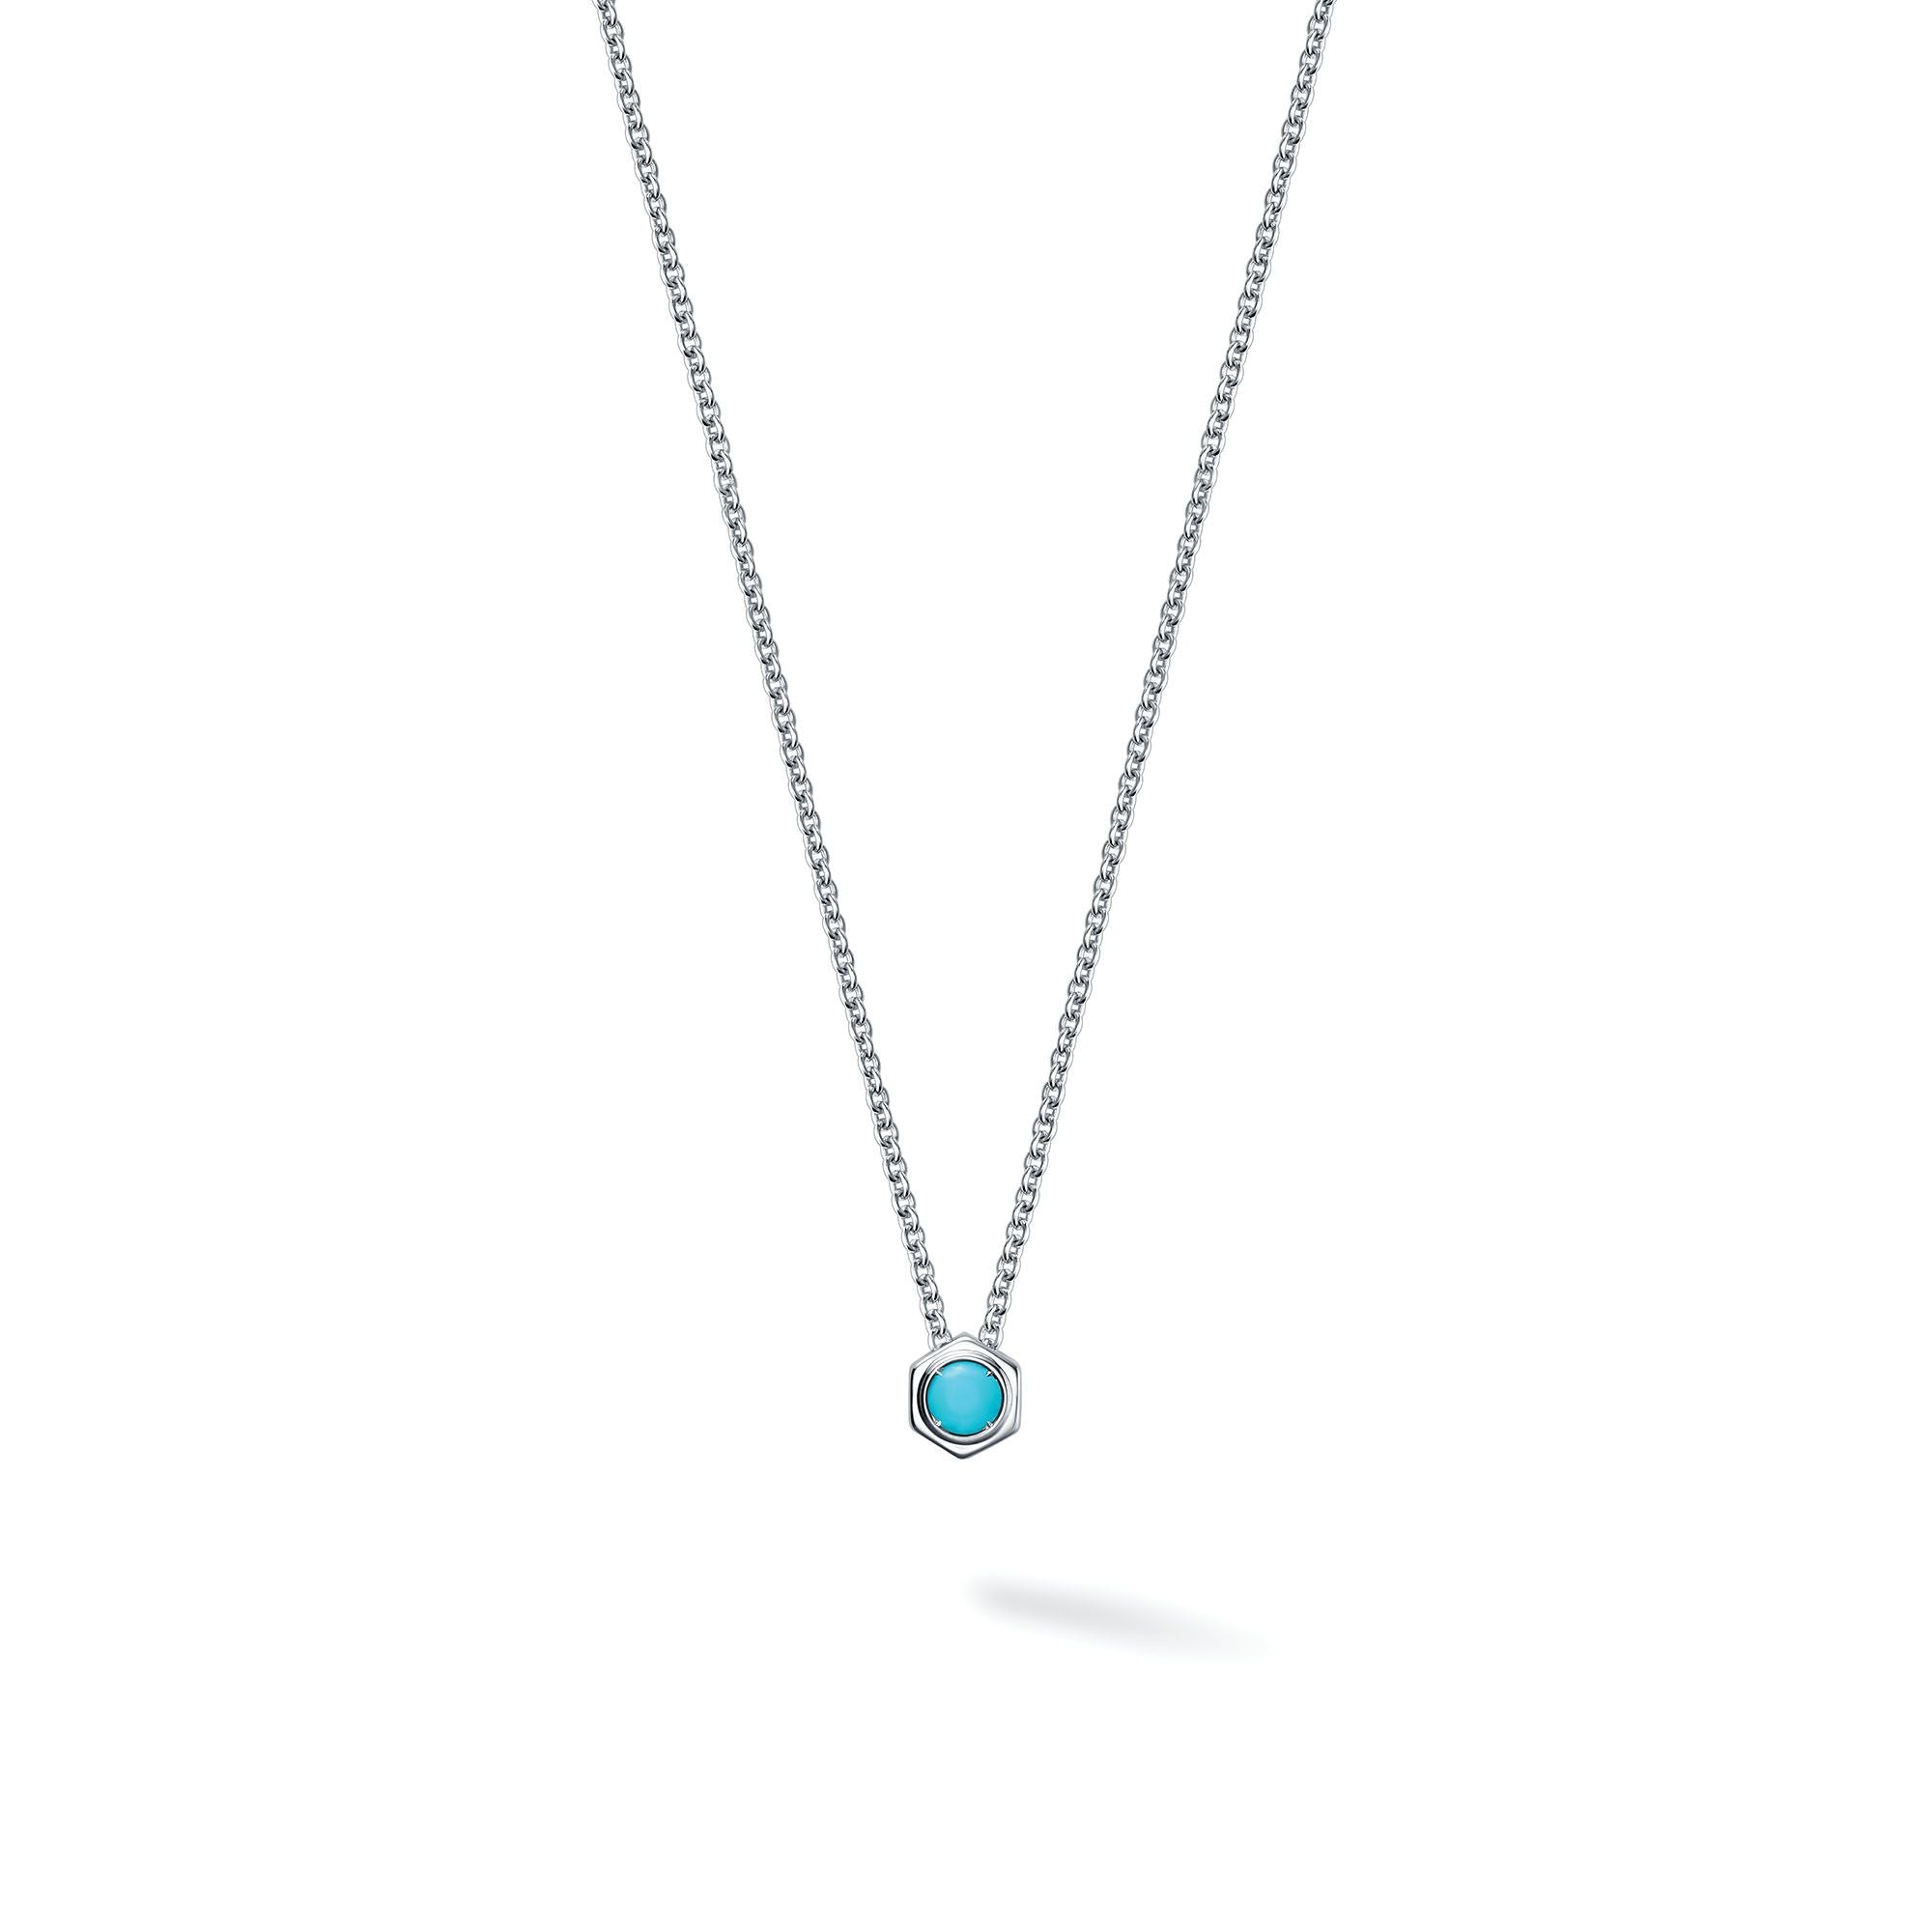 Birks Bee Chic Turquoise and Silver Necklace